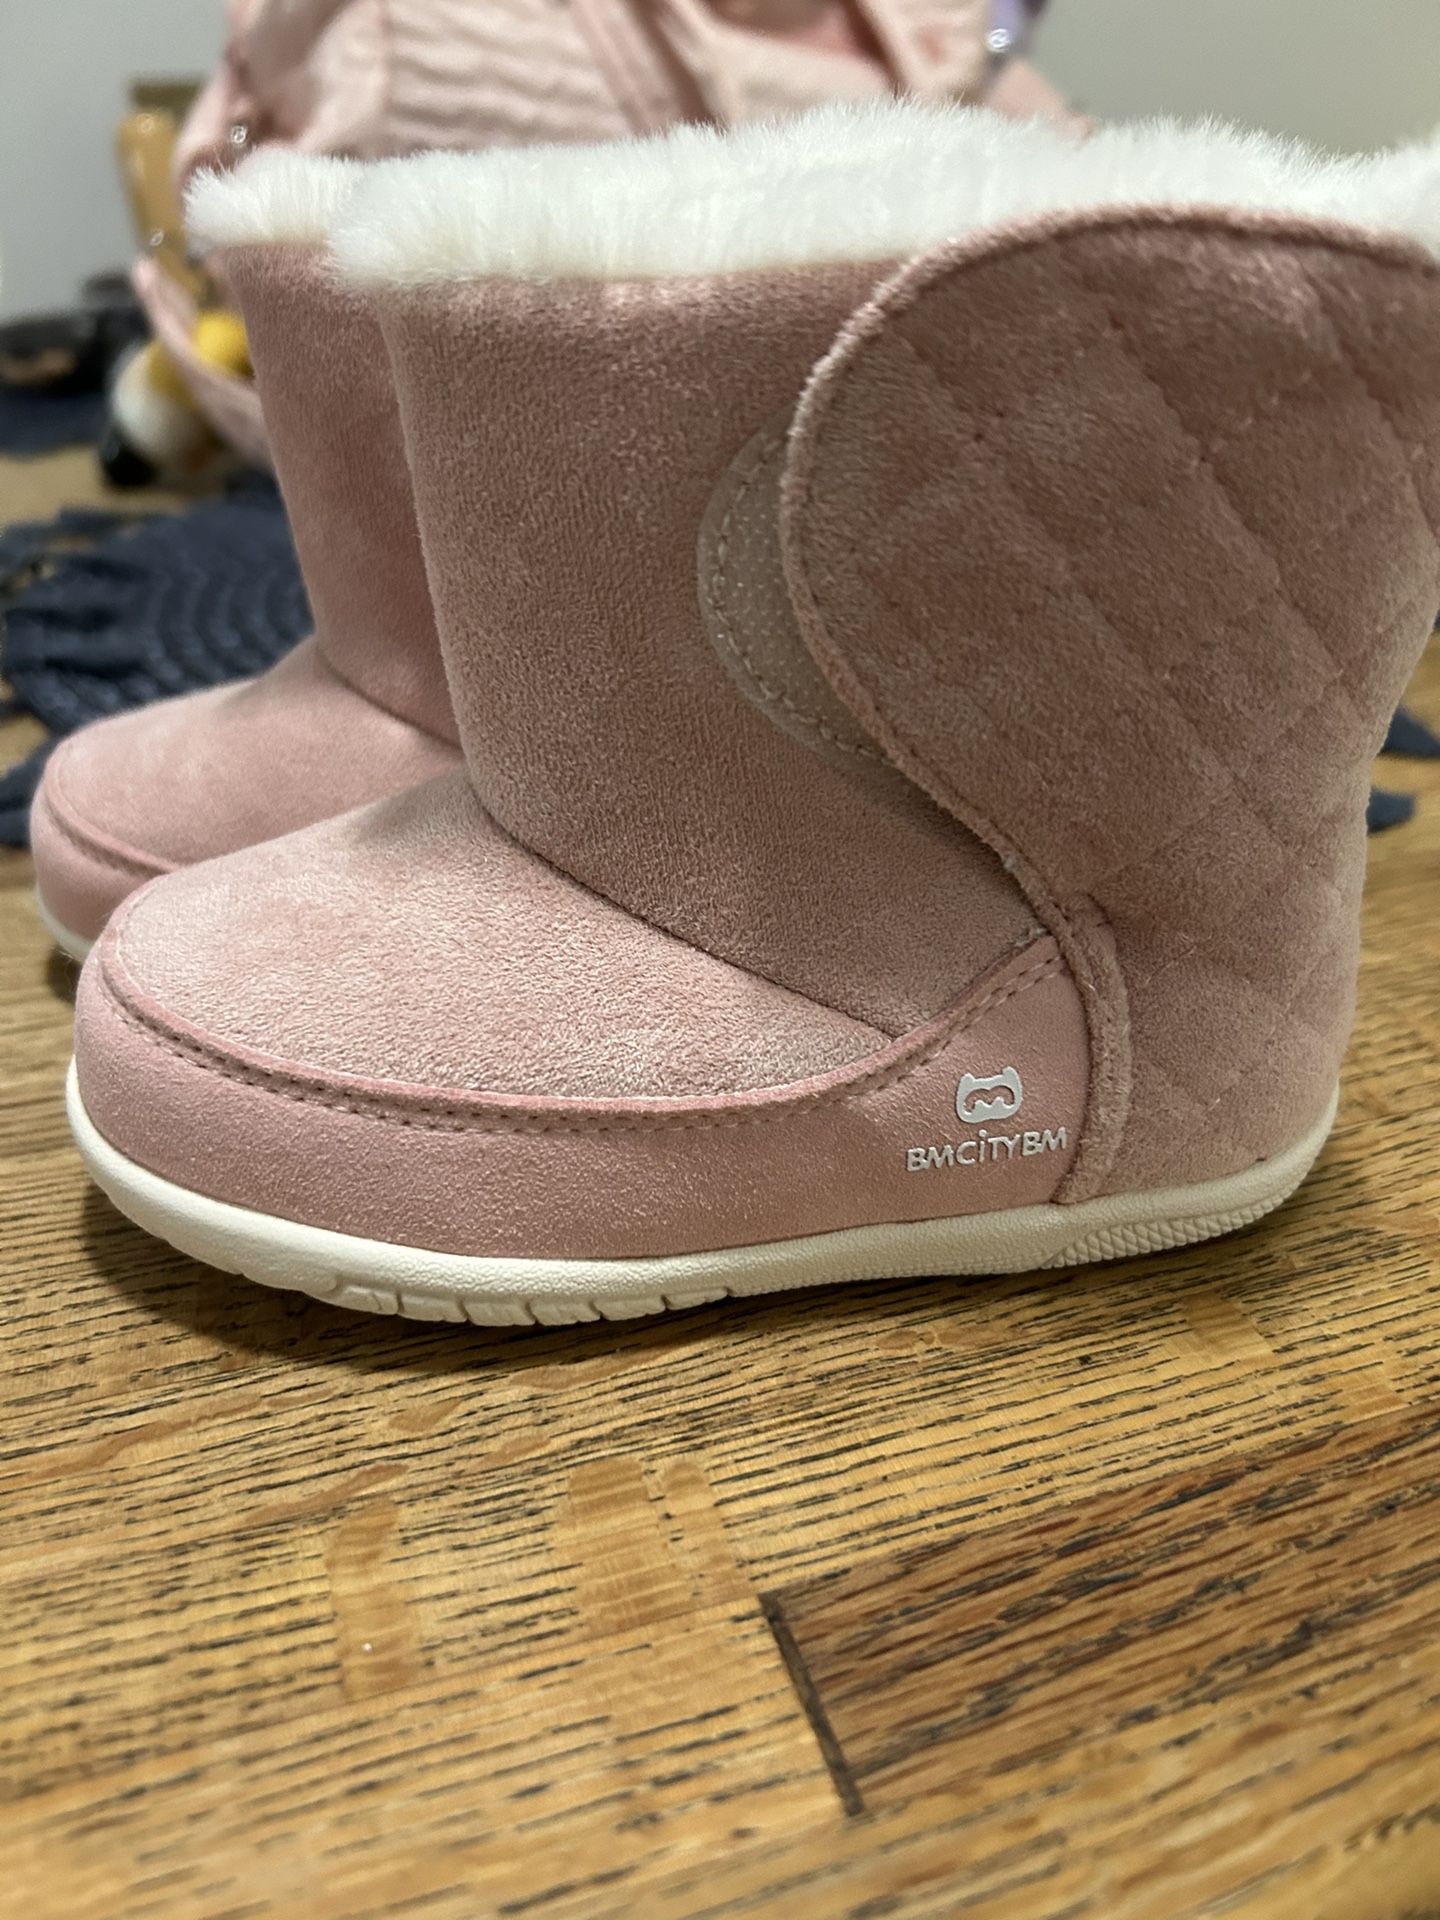 Toddler Girl Boots